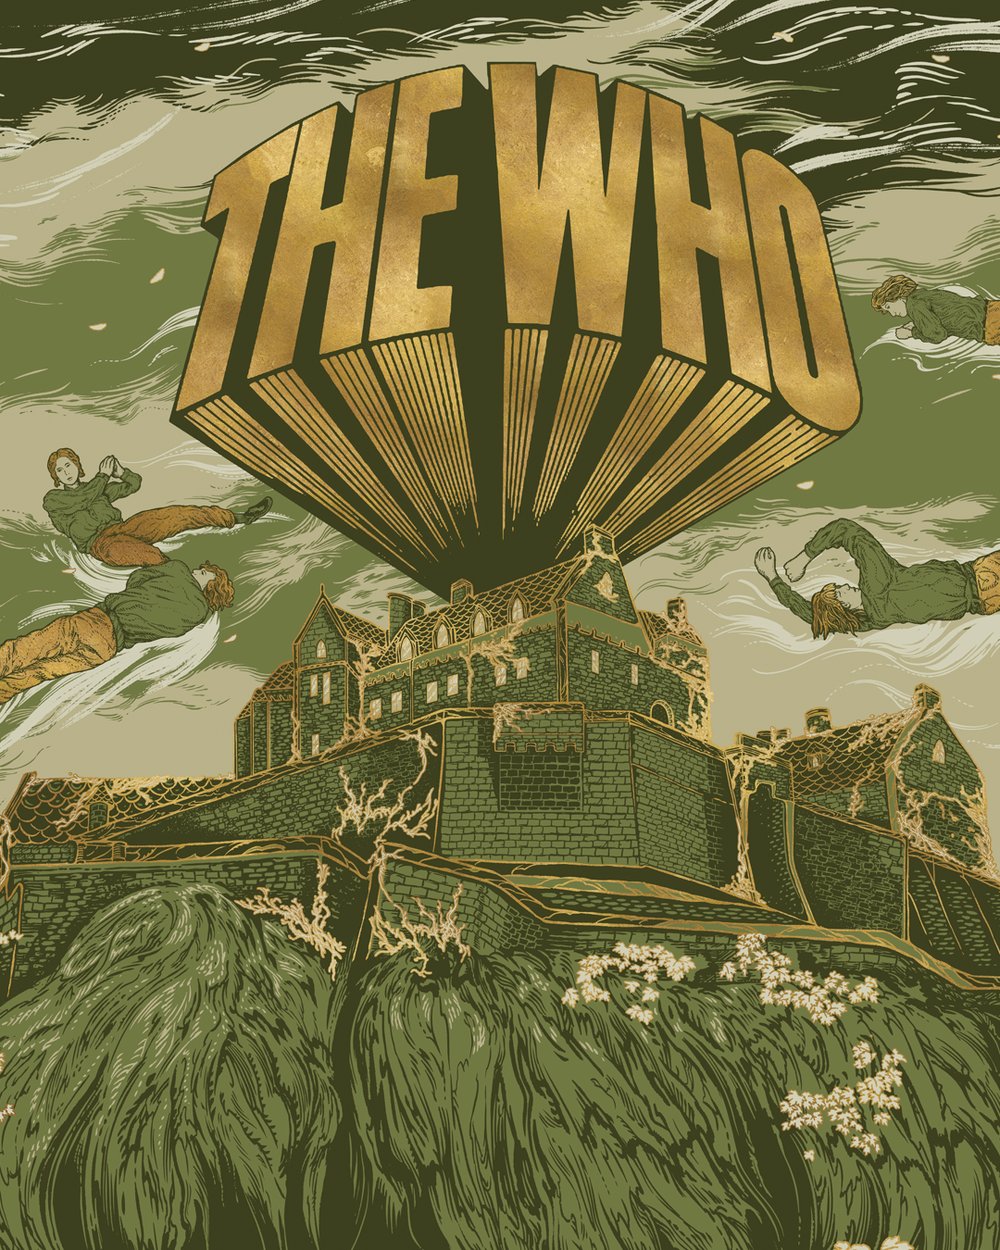 The Who, Edinburgh Castle 2023 - Limited Edition Artist Proof